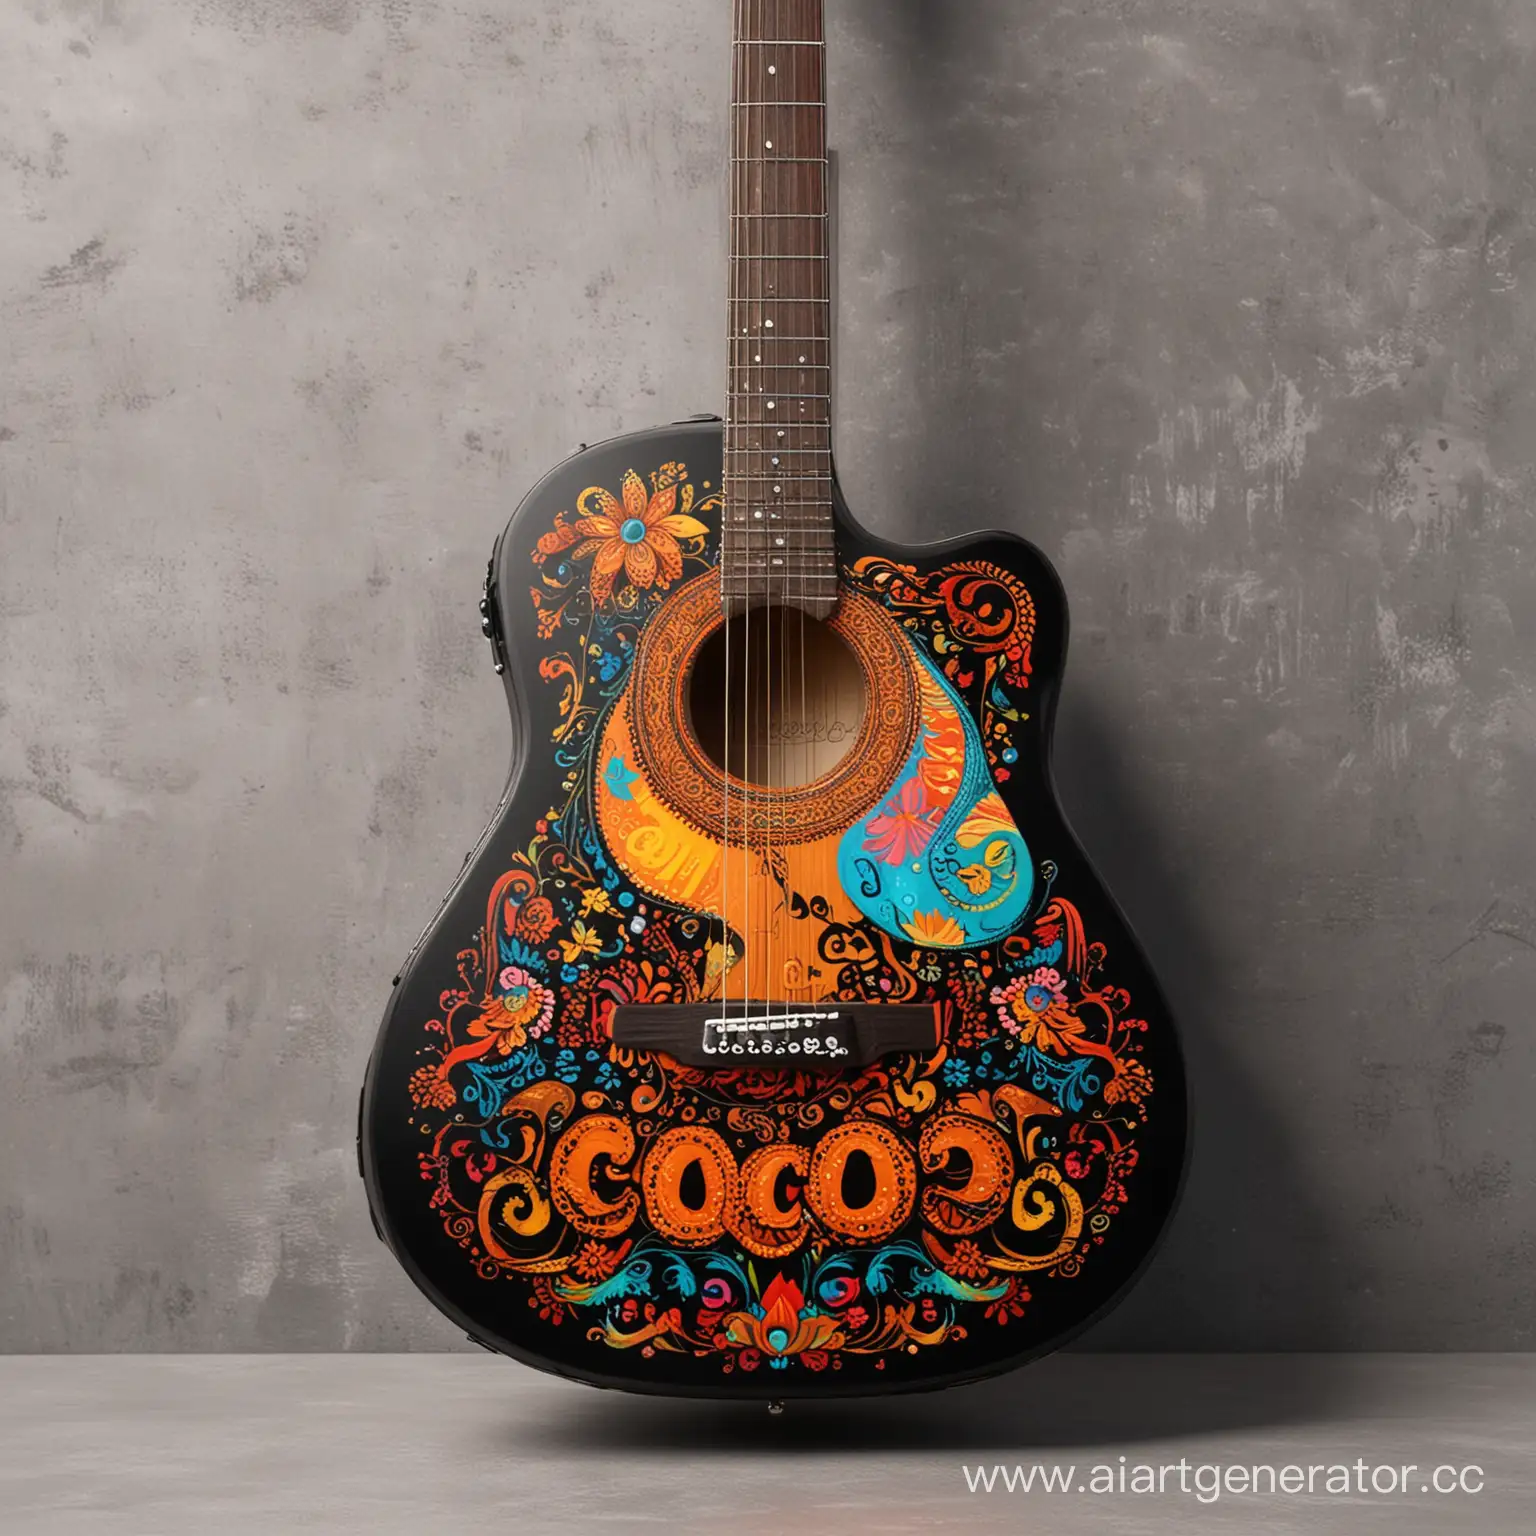 Vibrant-Cartoonstyle-Acoustic-Guitar-with-Coco-Artwork-in-Black